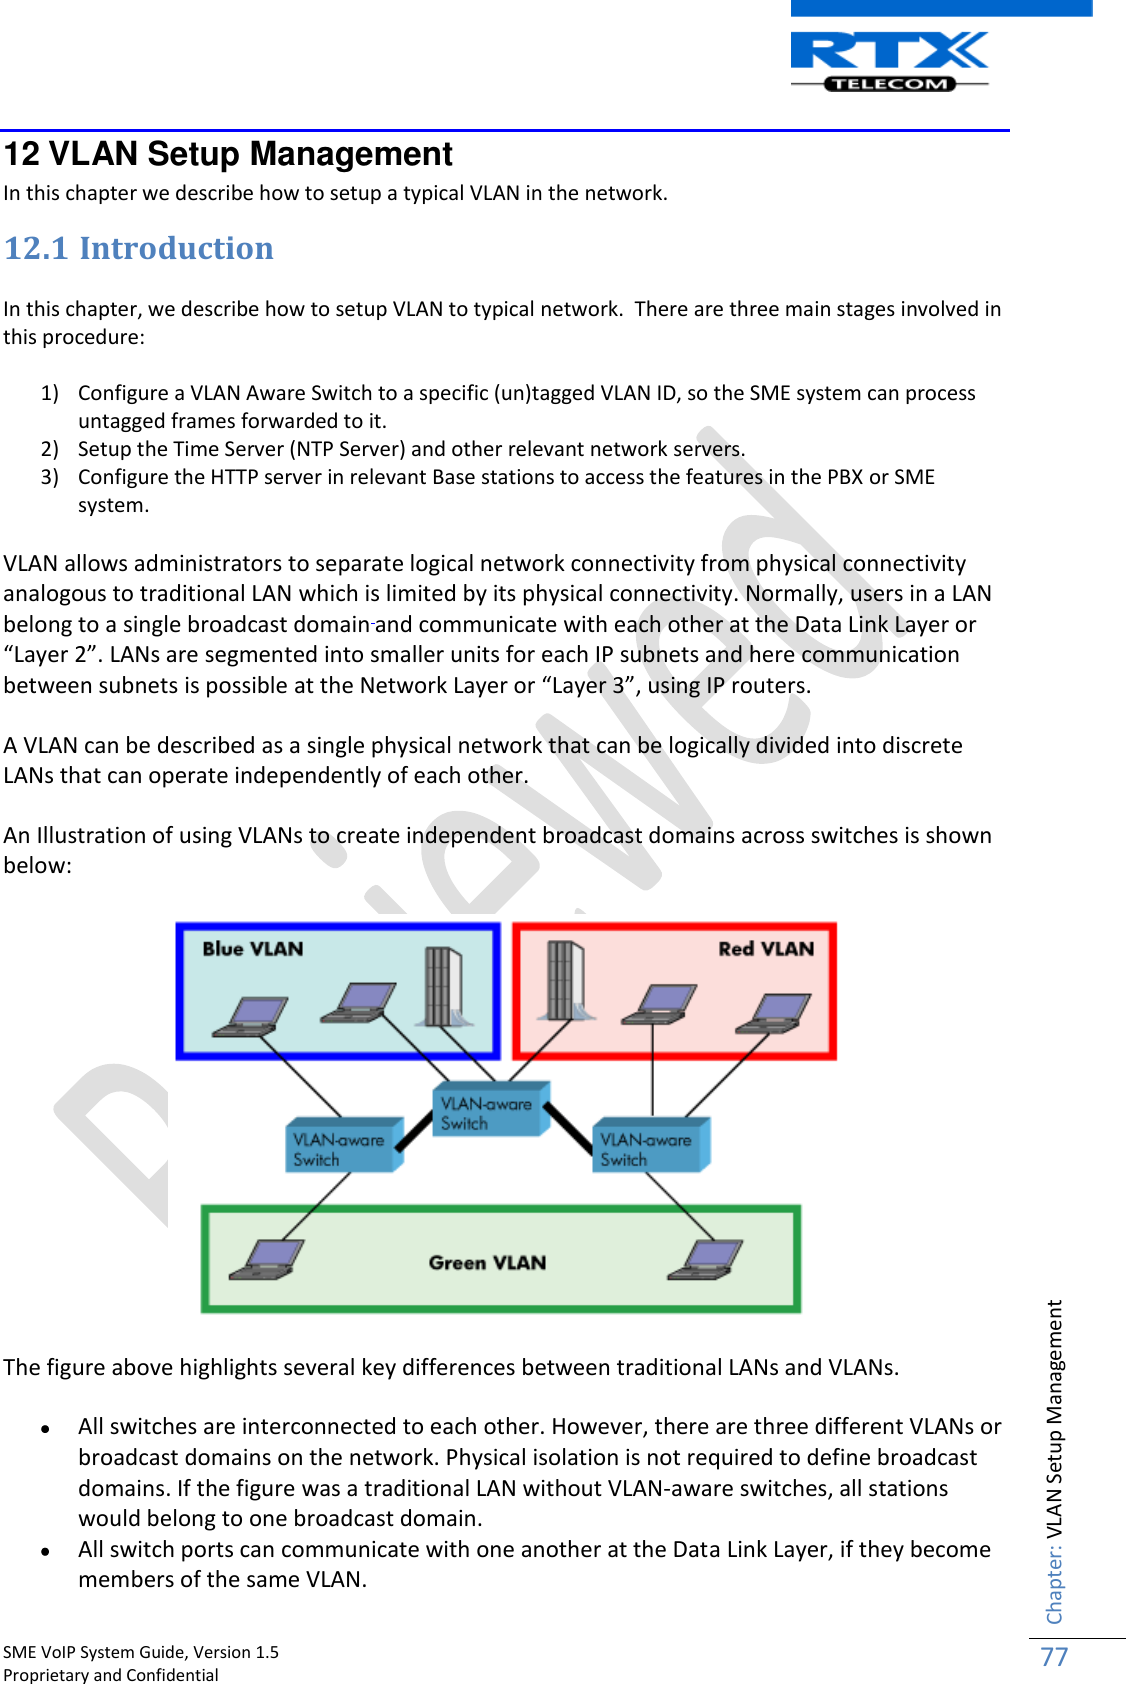    SME VoIP System Guide, Version 1.5                                                                                                                                                          Proprietary and Confidential    Chapter: VLAN Setup Management 77  12 VLAN Setup Management In this chapter we describe how to setup a typical VLAN in the network. 12.1 Introduction  In this chapter, we describe how to setup VLAN to typical network.  There are three main stages involved in this procedure:  1) Configure a VLAN Aware Switch to a specific (un)tagged VLAN ID, so the SME system can process untagged frames forwarded to it. 2) Setup the Time Server (NTP Server) and other relevant network servers. 3) Configure the HTTP server in relevant Base stations to access the features in the PBX or SME system. VLAN allows administrators to separate logical network connectivity from physical connectivity analogous to traditional LAN which is limited by its physical connectivity. Normally, users in a LAN belong to a single broadcast domain and communicate with each other at the Data Link Layer or “Layer 2”. LANs are segmented into smaller units for each IP subnets and here communication between subnets is possible at the Network Layer or “Layer 3”, using IP routers. A VLAN can be described as a single physical network that can be logically divided into discrete LANs that can operate independently of each other. An Illustration of using VLANs to create independent broadcast domains across switches is shown below:  The figure above highlights several key differences between traditional LANs and VLANs.  All switches are interconnected to each other. However, there are three different VLANs or broadcast domains on the network. Physical isolation is not required to define broadcast domains. If the figure was a traditional LAN without VLAN-aware switches, all stations would belong to one broadcast domain.  All switch ports can communicate with one another at the Data Link Layer, if they become members of the same VLAN. 